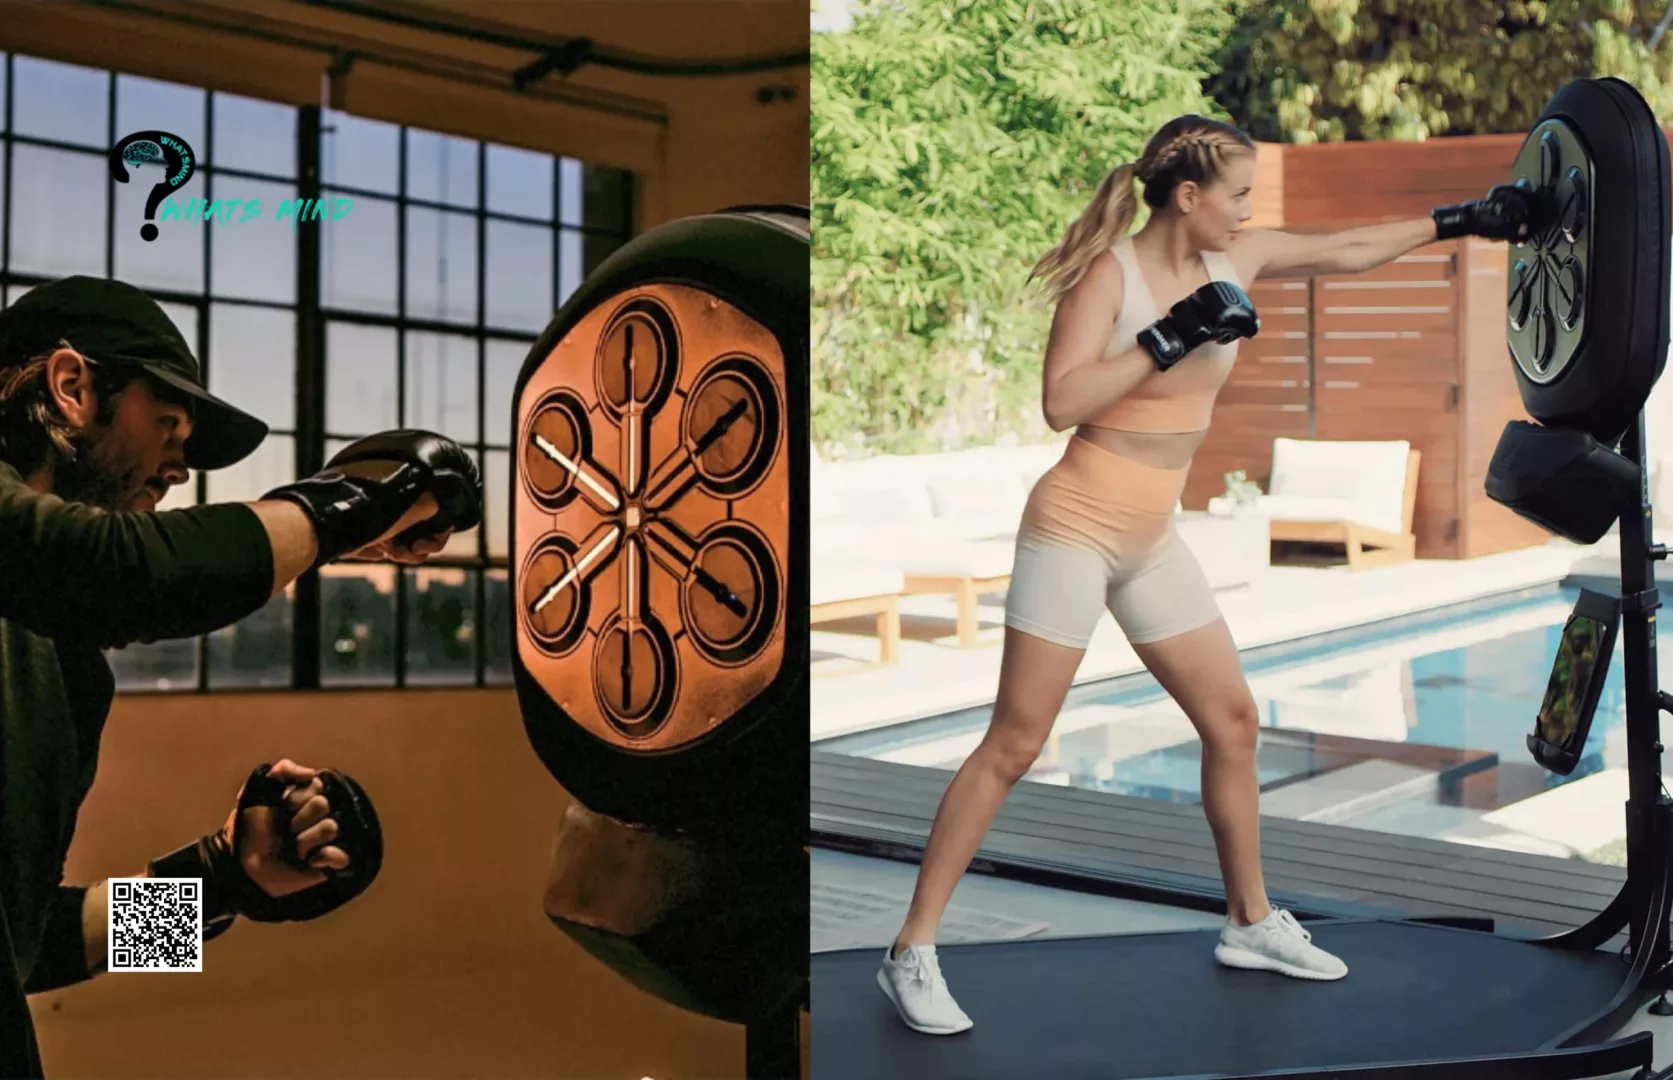 Liteboxer Is the Strangest Piece of Workout Equipment I've Ever